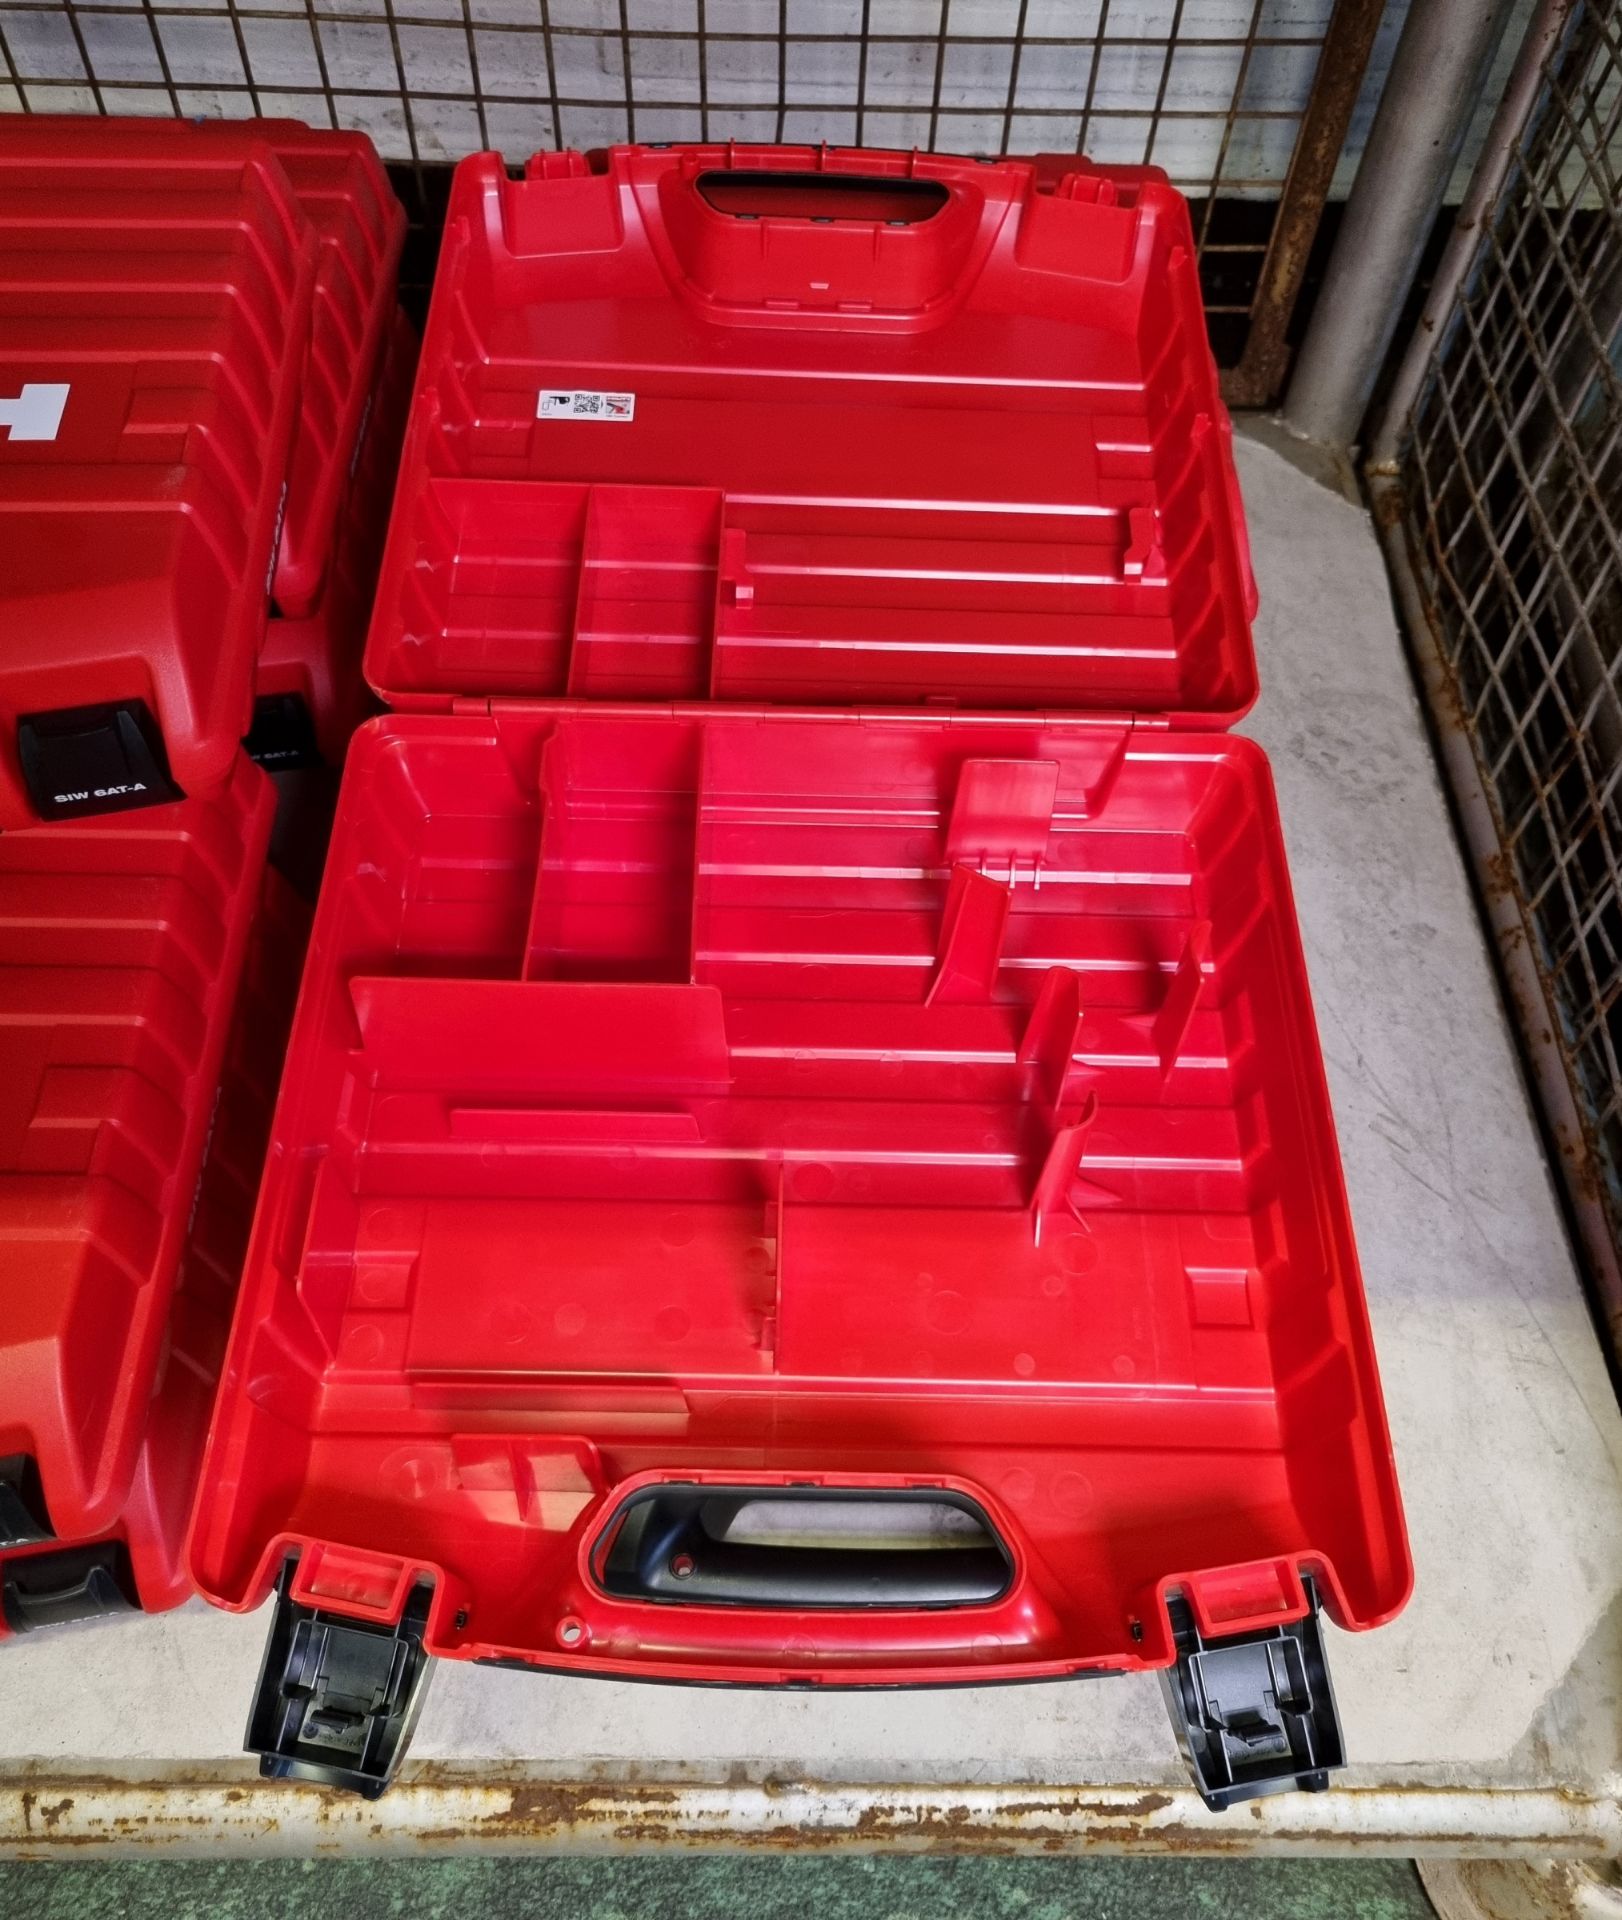 10x Hilti SIW 6AT-A22 cordless impact wrench EMPTY CASES - Image 3 of 4